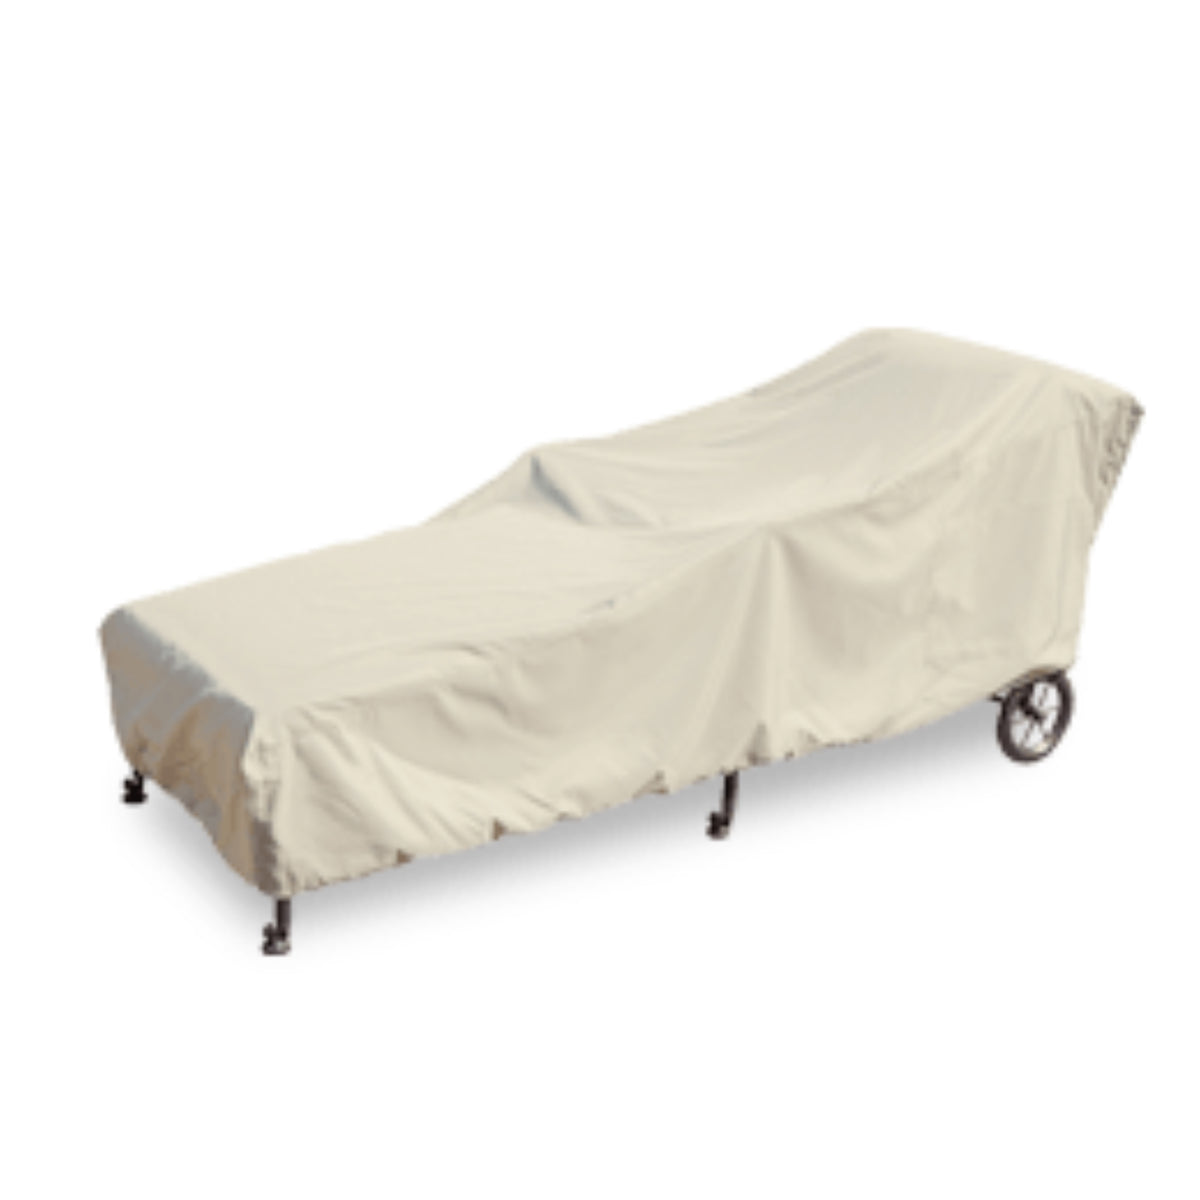 Small Chaise Lounger Cover